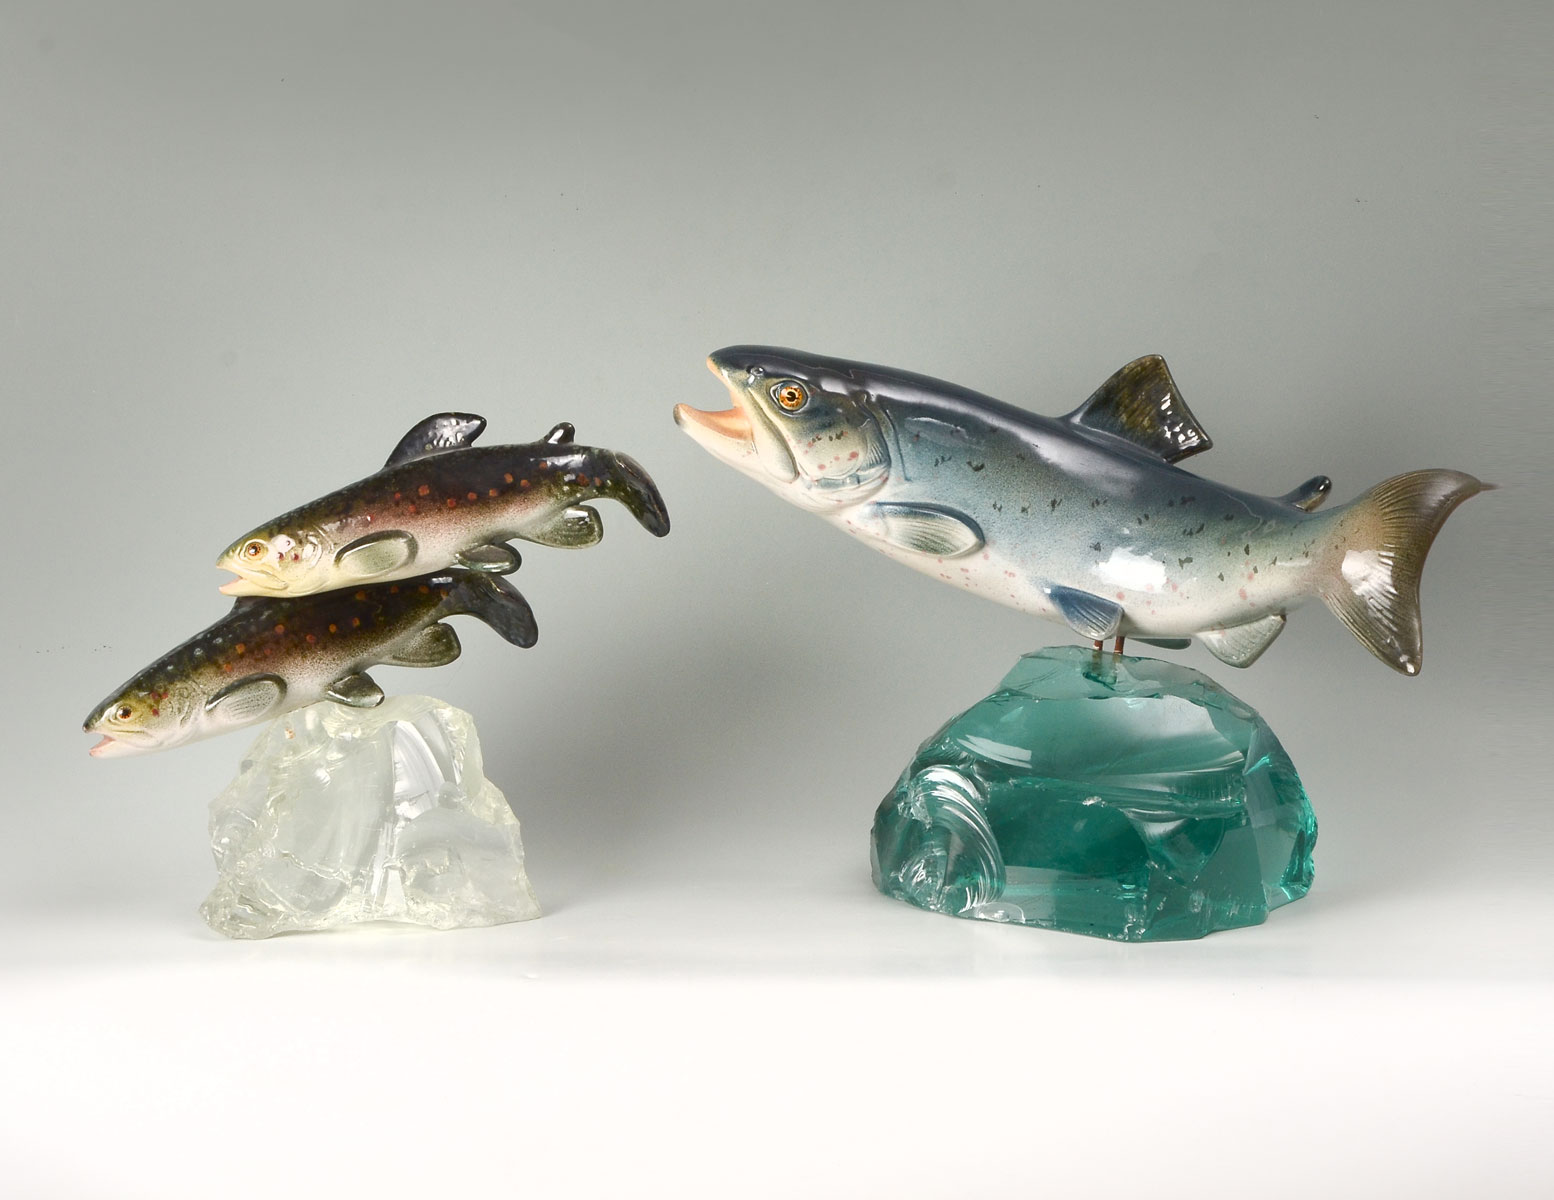 2 FRENCH PORCELAIN FISH ON GLASS 27764a